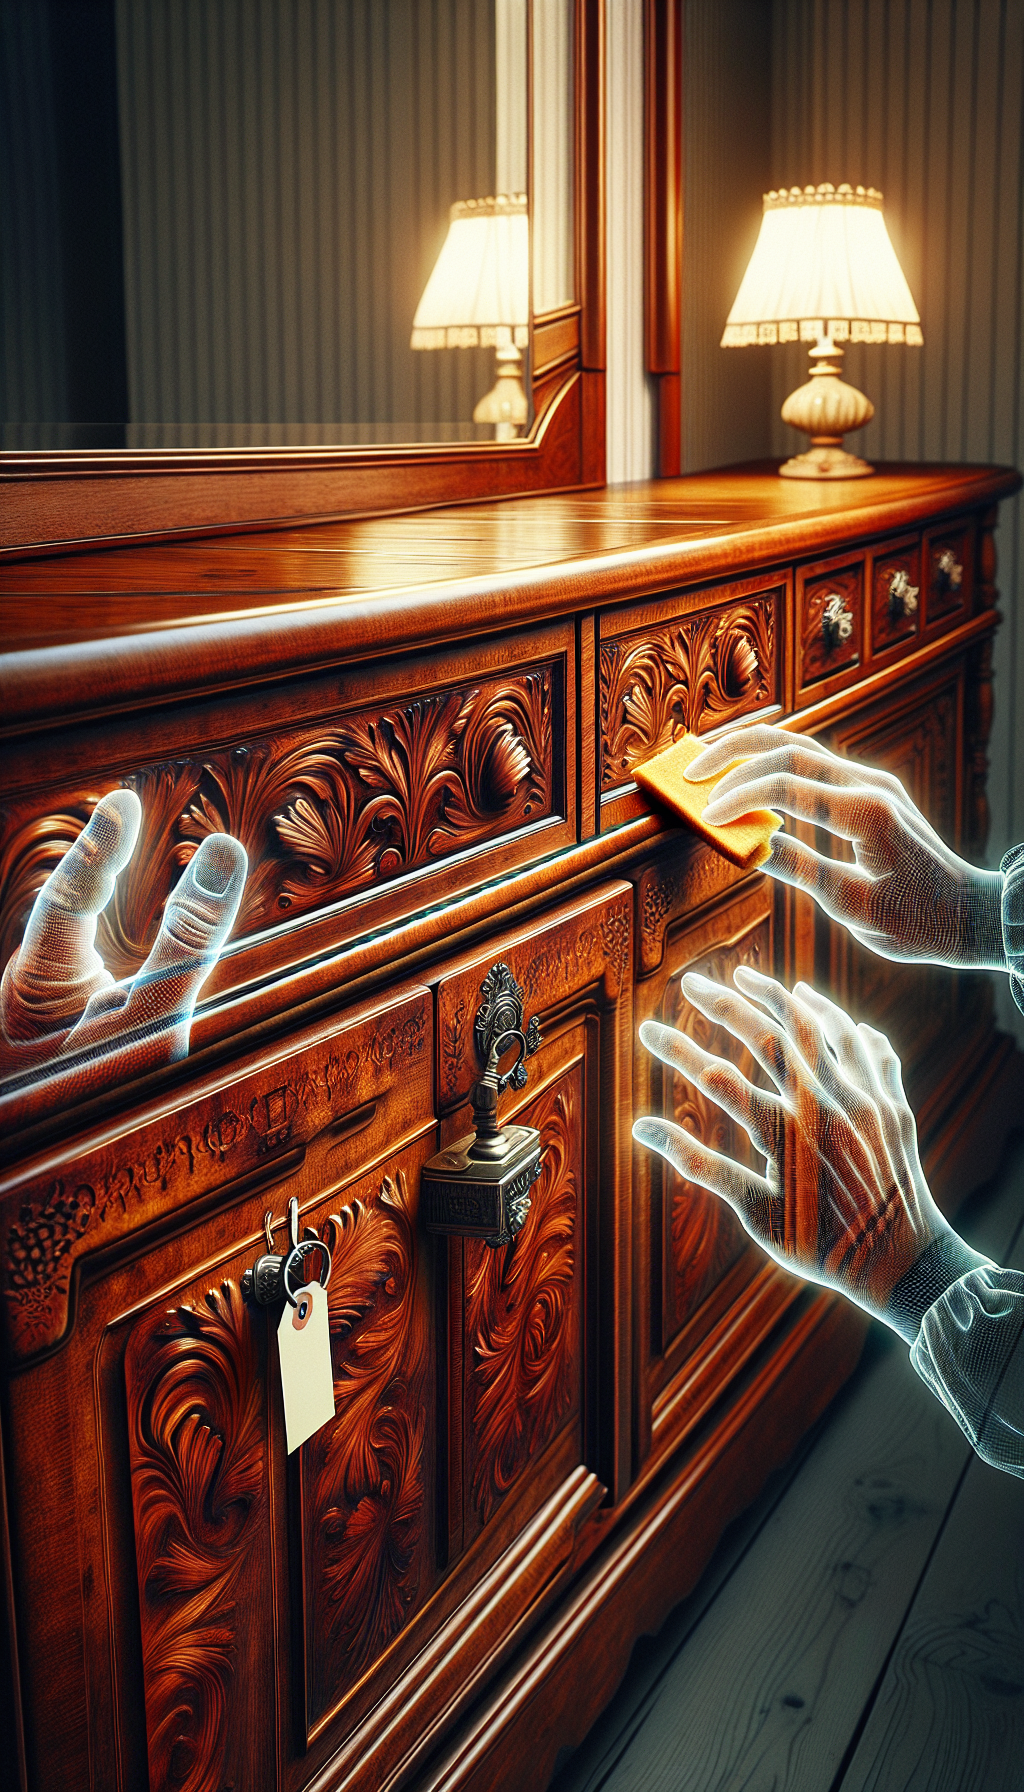 A Victorian-style sideboard with an ornate mirror glimmers as a translucent overlay of hands gently buffs the surface, with a glowing aura to signify its value. The wood grain is detailed, reflecting care, with a sidebar of miniature tools like polish and a soft cloth. A shimmering price tag dangles from an antique key in the lock, blending worth with preservation.